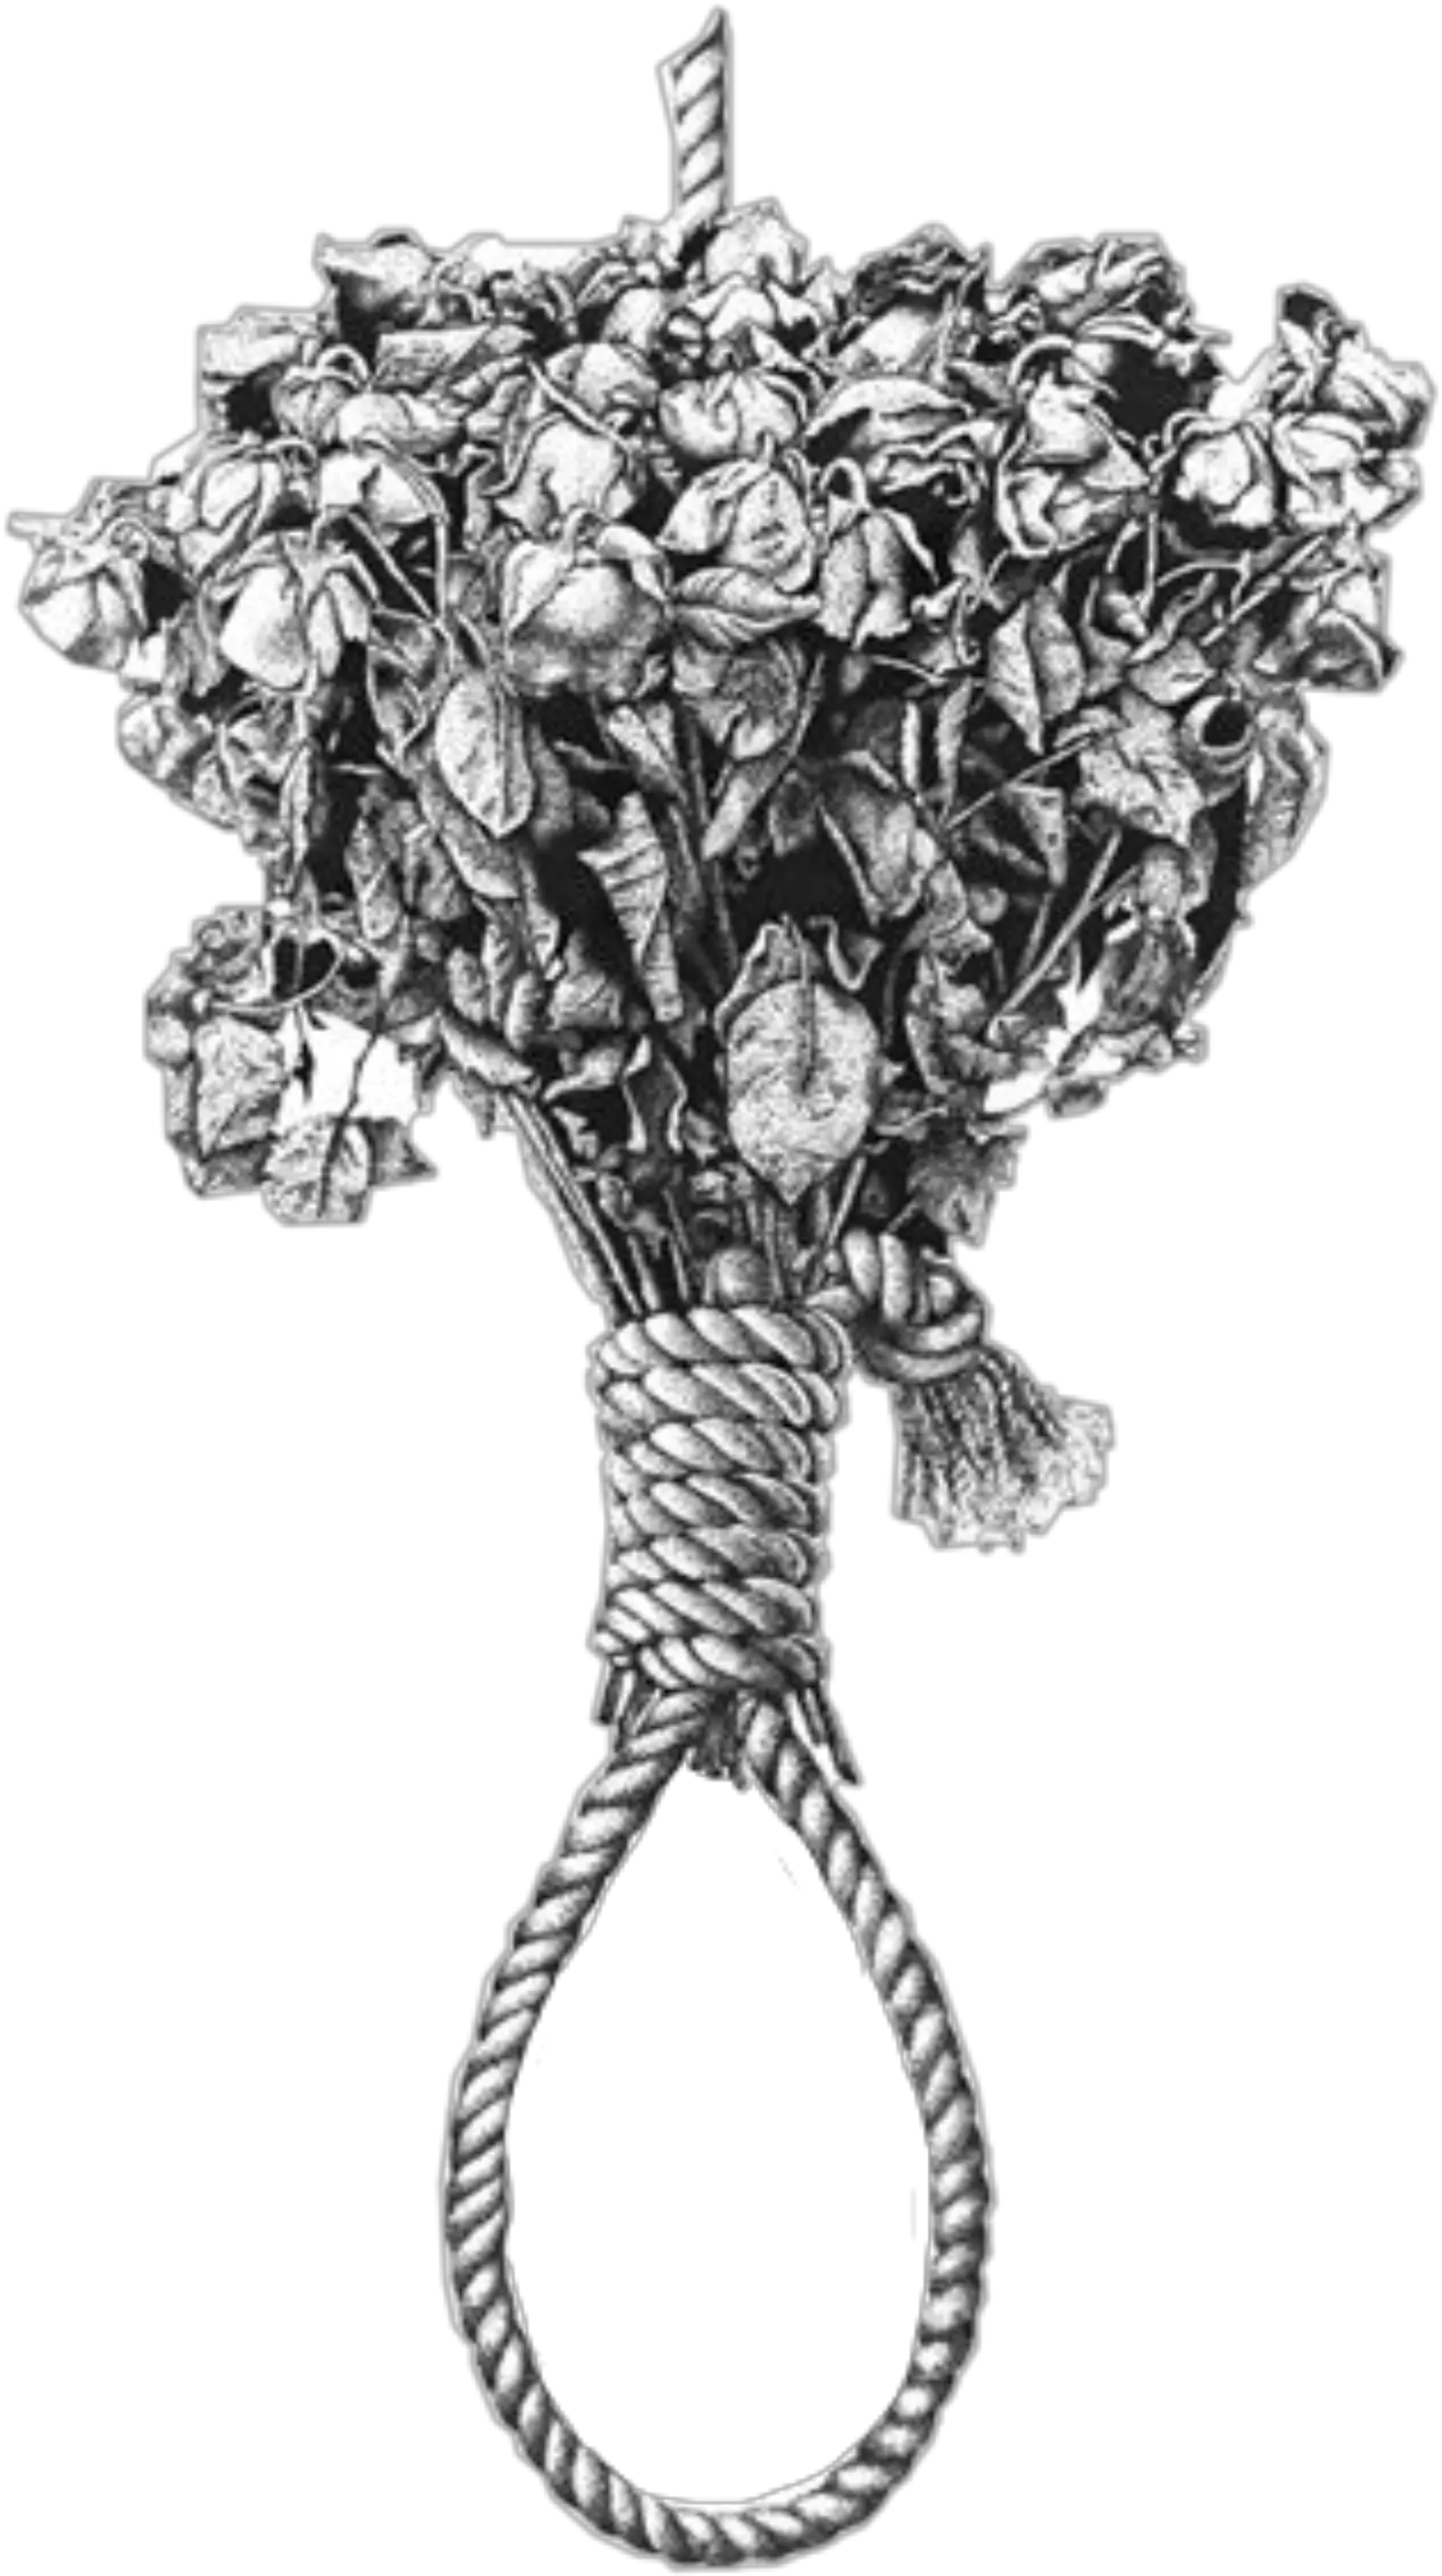 Deadflowers Brokenheart Noose Sticker By Emily Happens When You Call The Suicide Hotline Png Noose Transparent